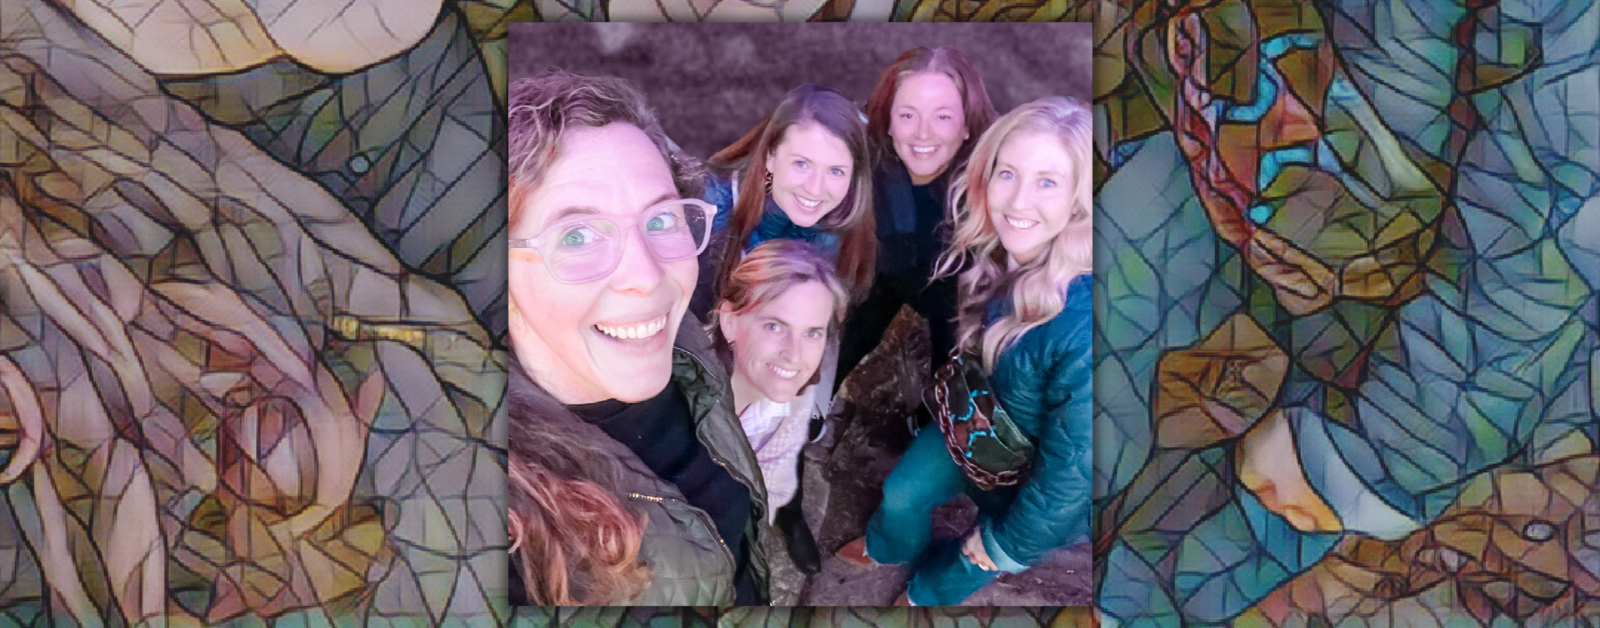 mosaic background behind a photo of amy Julia with four grown-up friends posing with her for a selfie